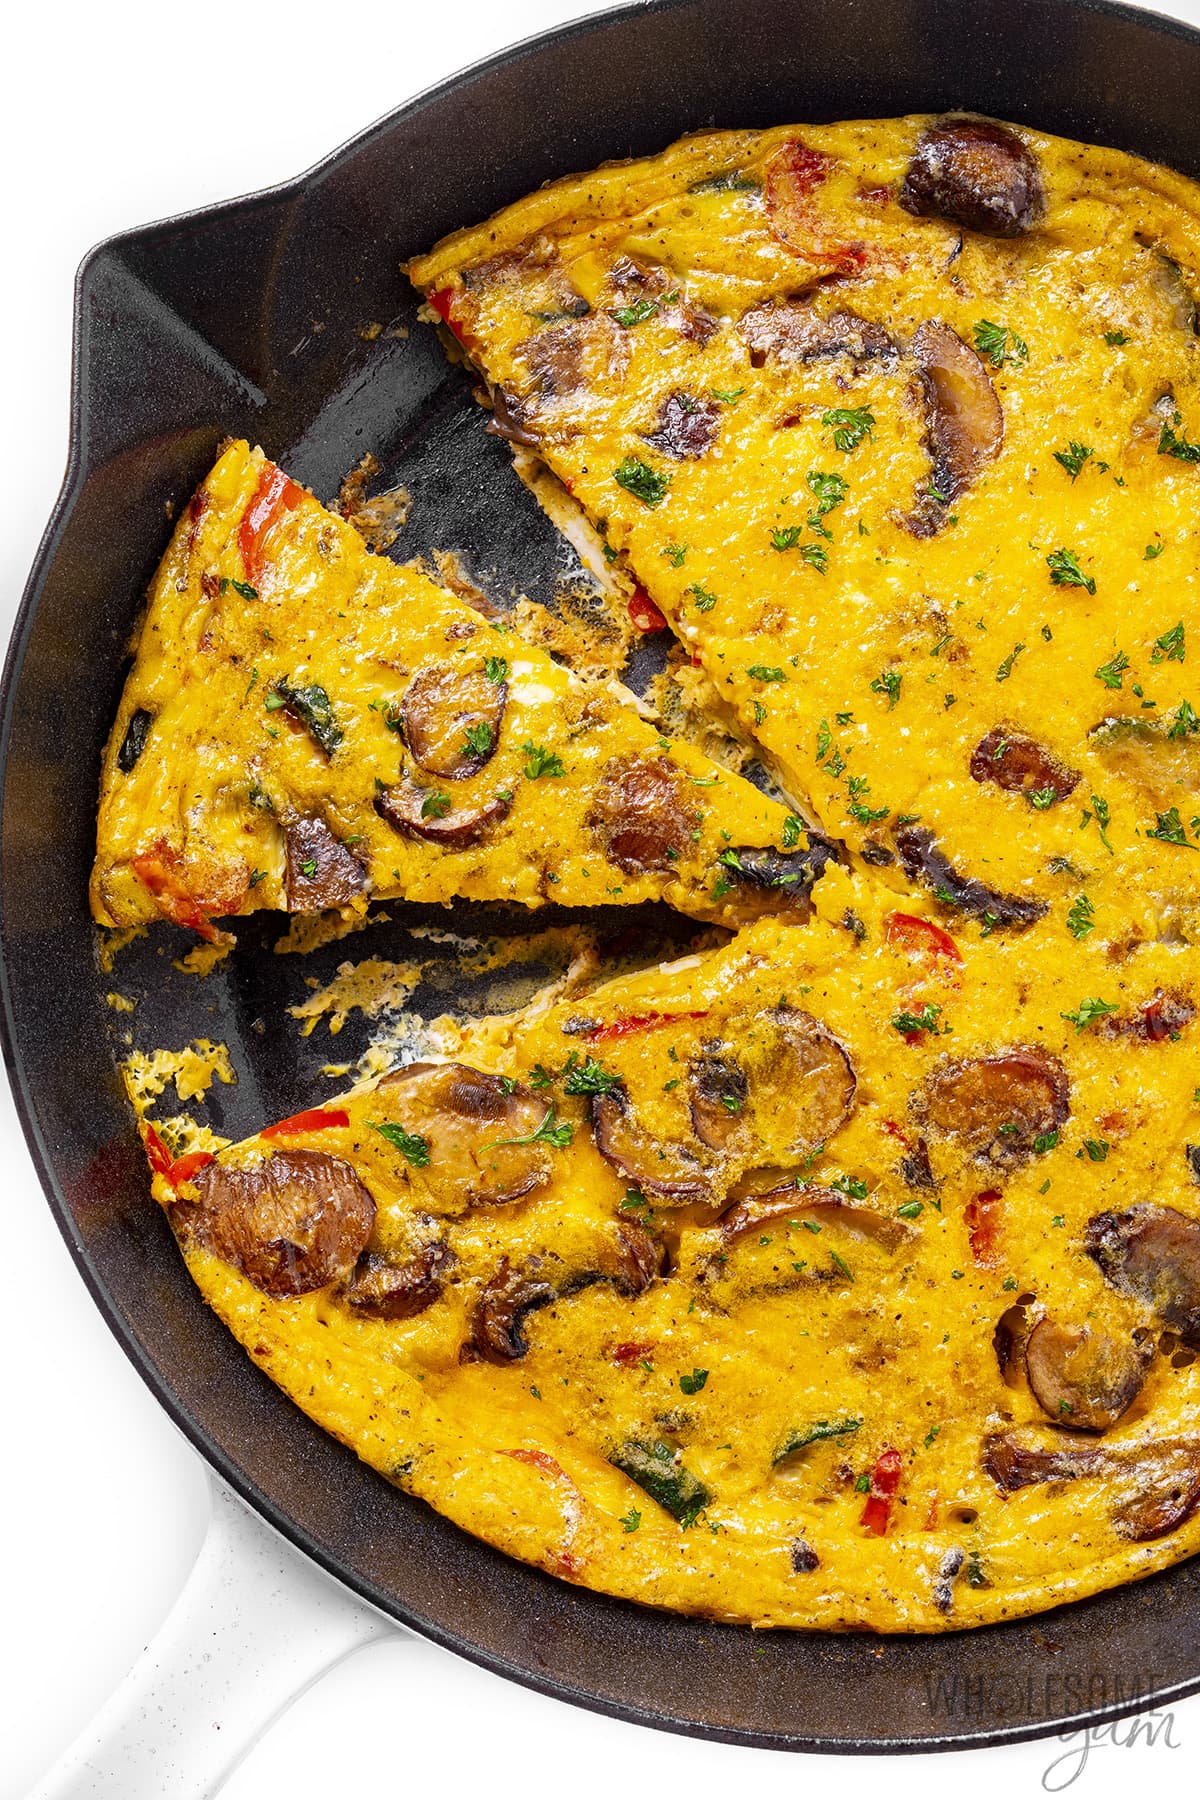 Vegetable frittata cut into slices in skillet.